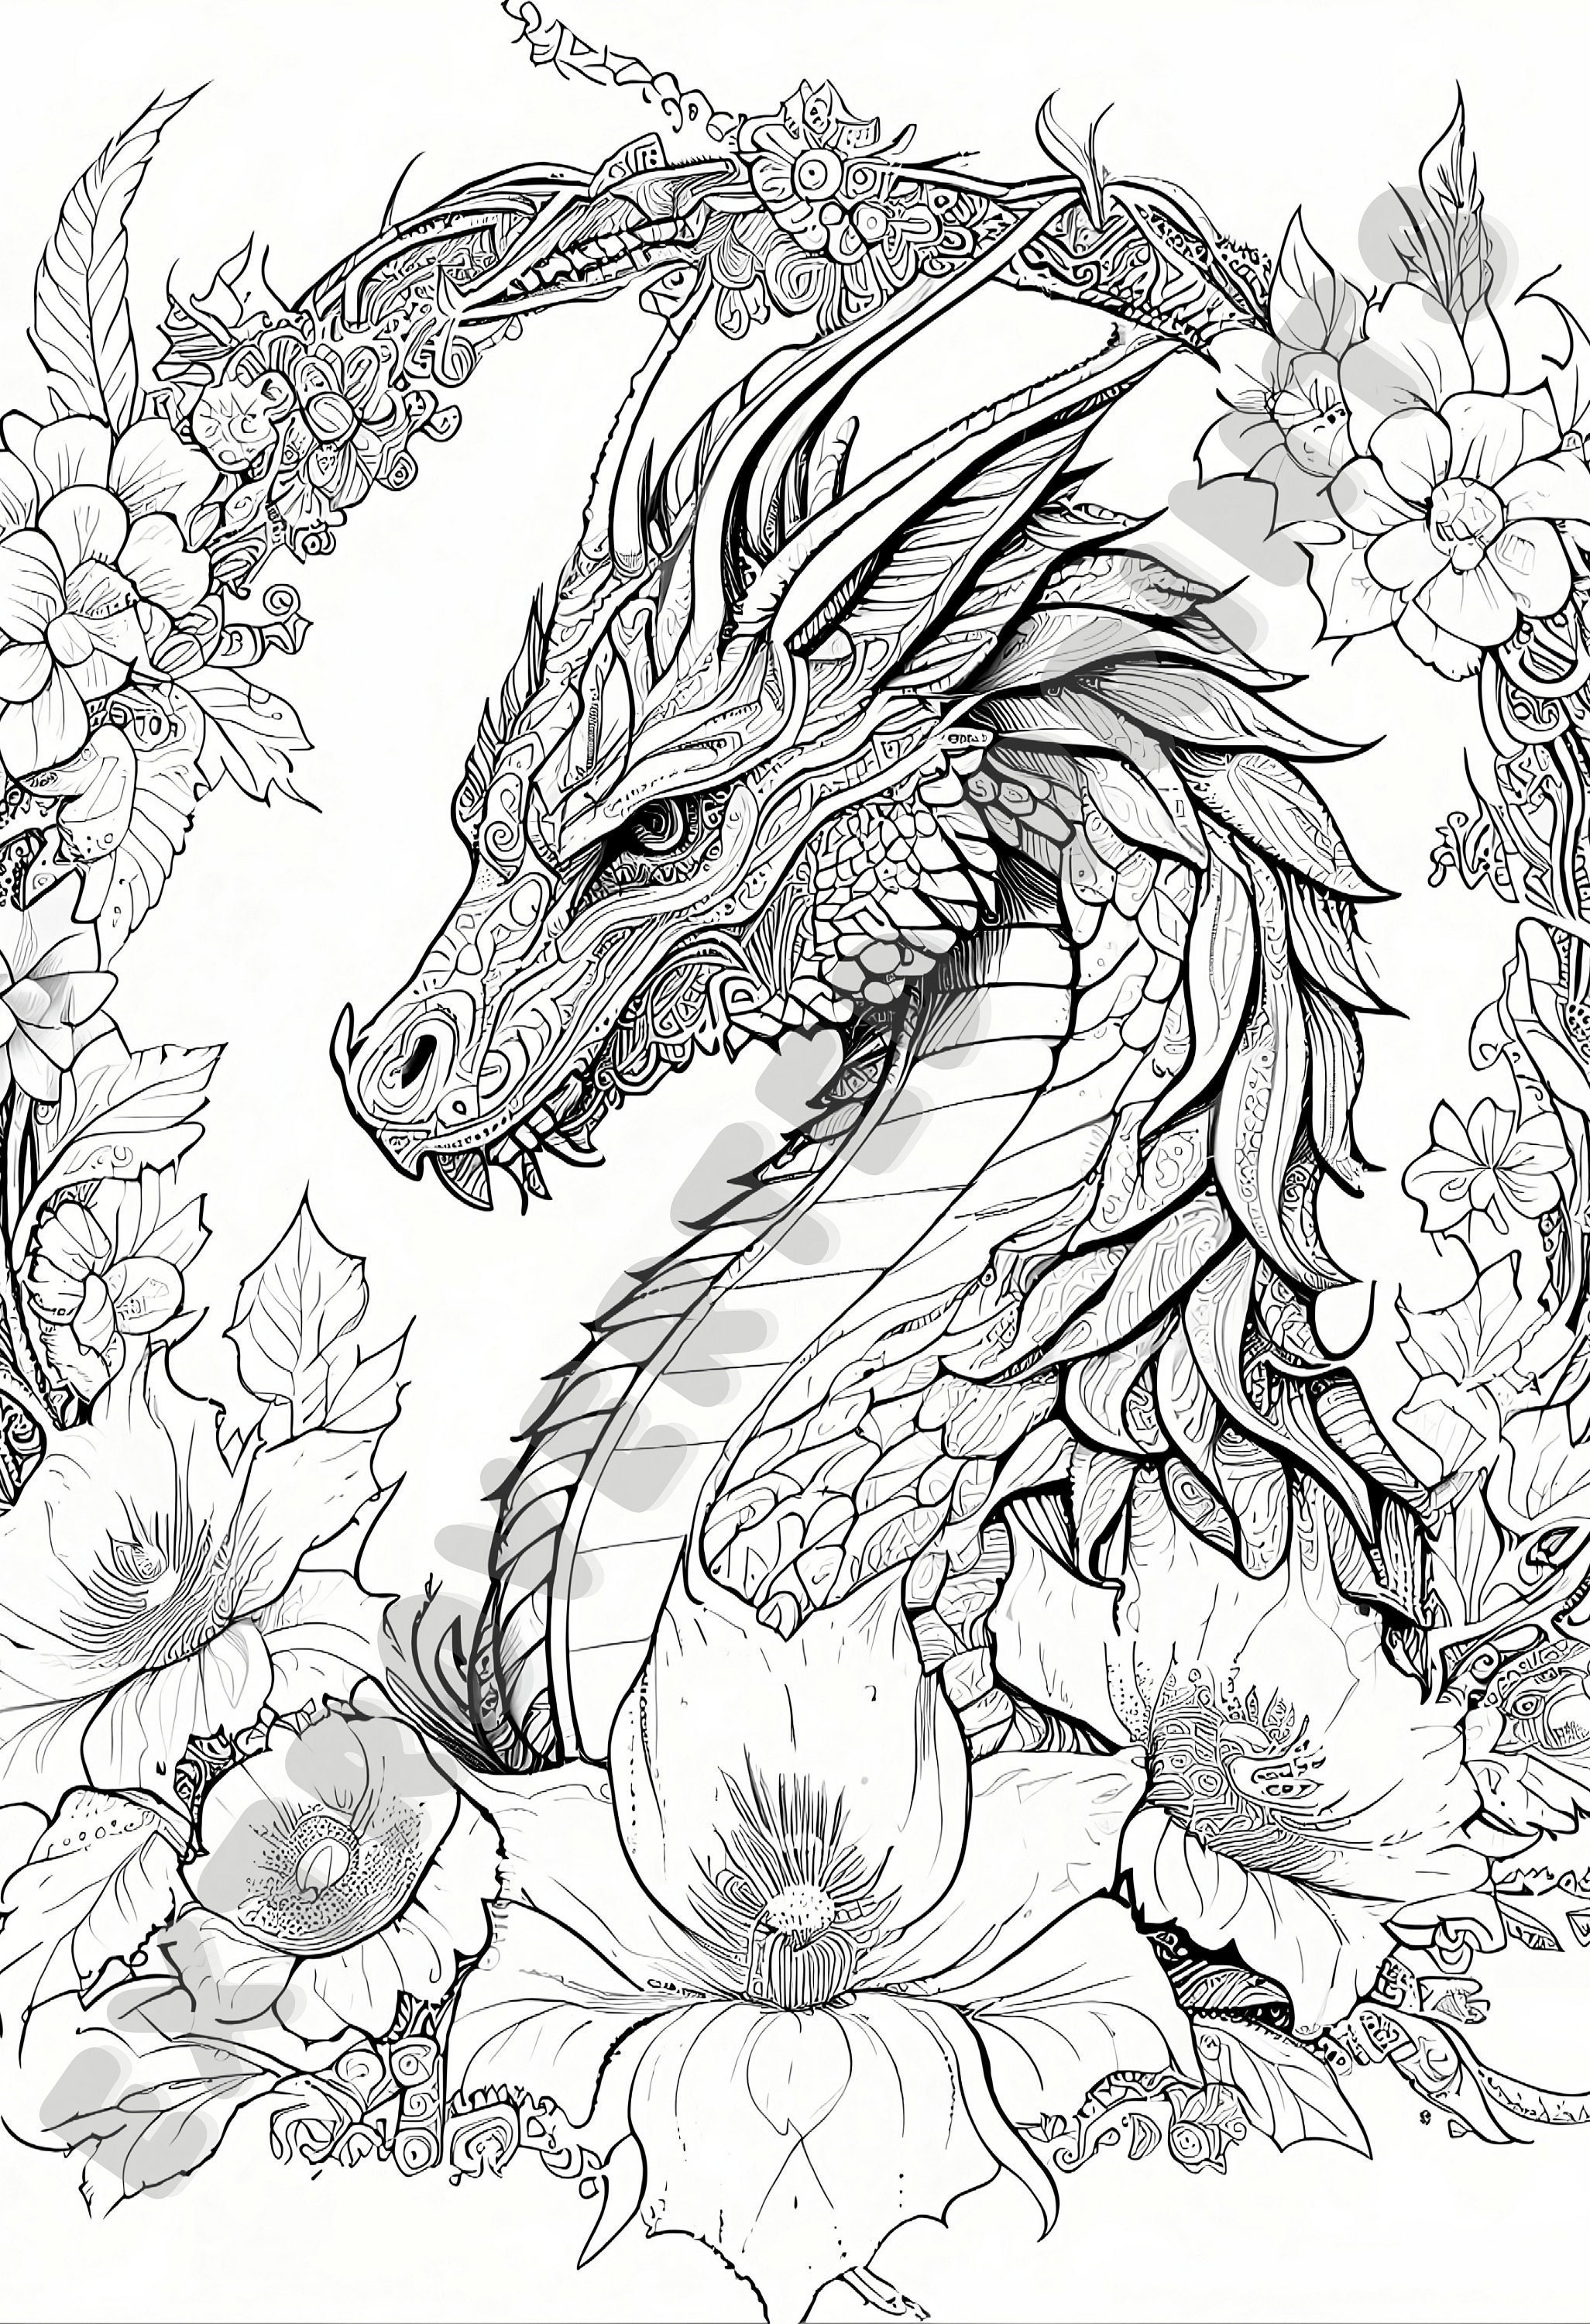 Targaryen dragon coloring page for kids and adults who experience adhd anxiety relaxin meditation instant digital download pdf file